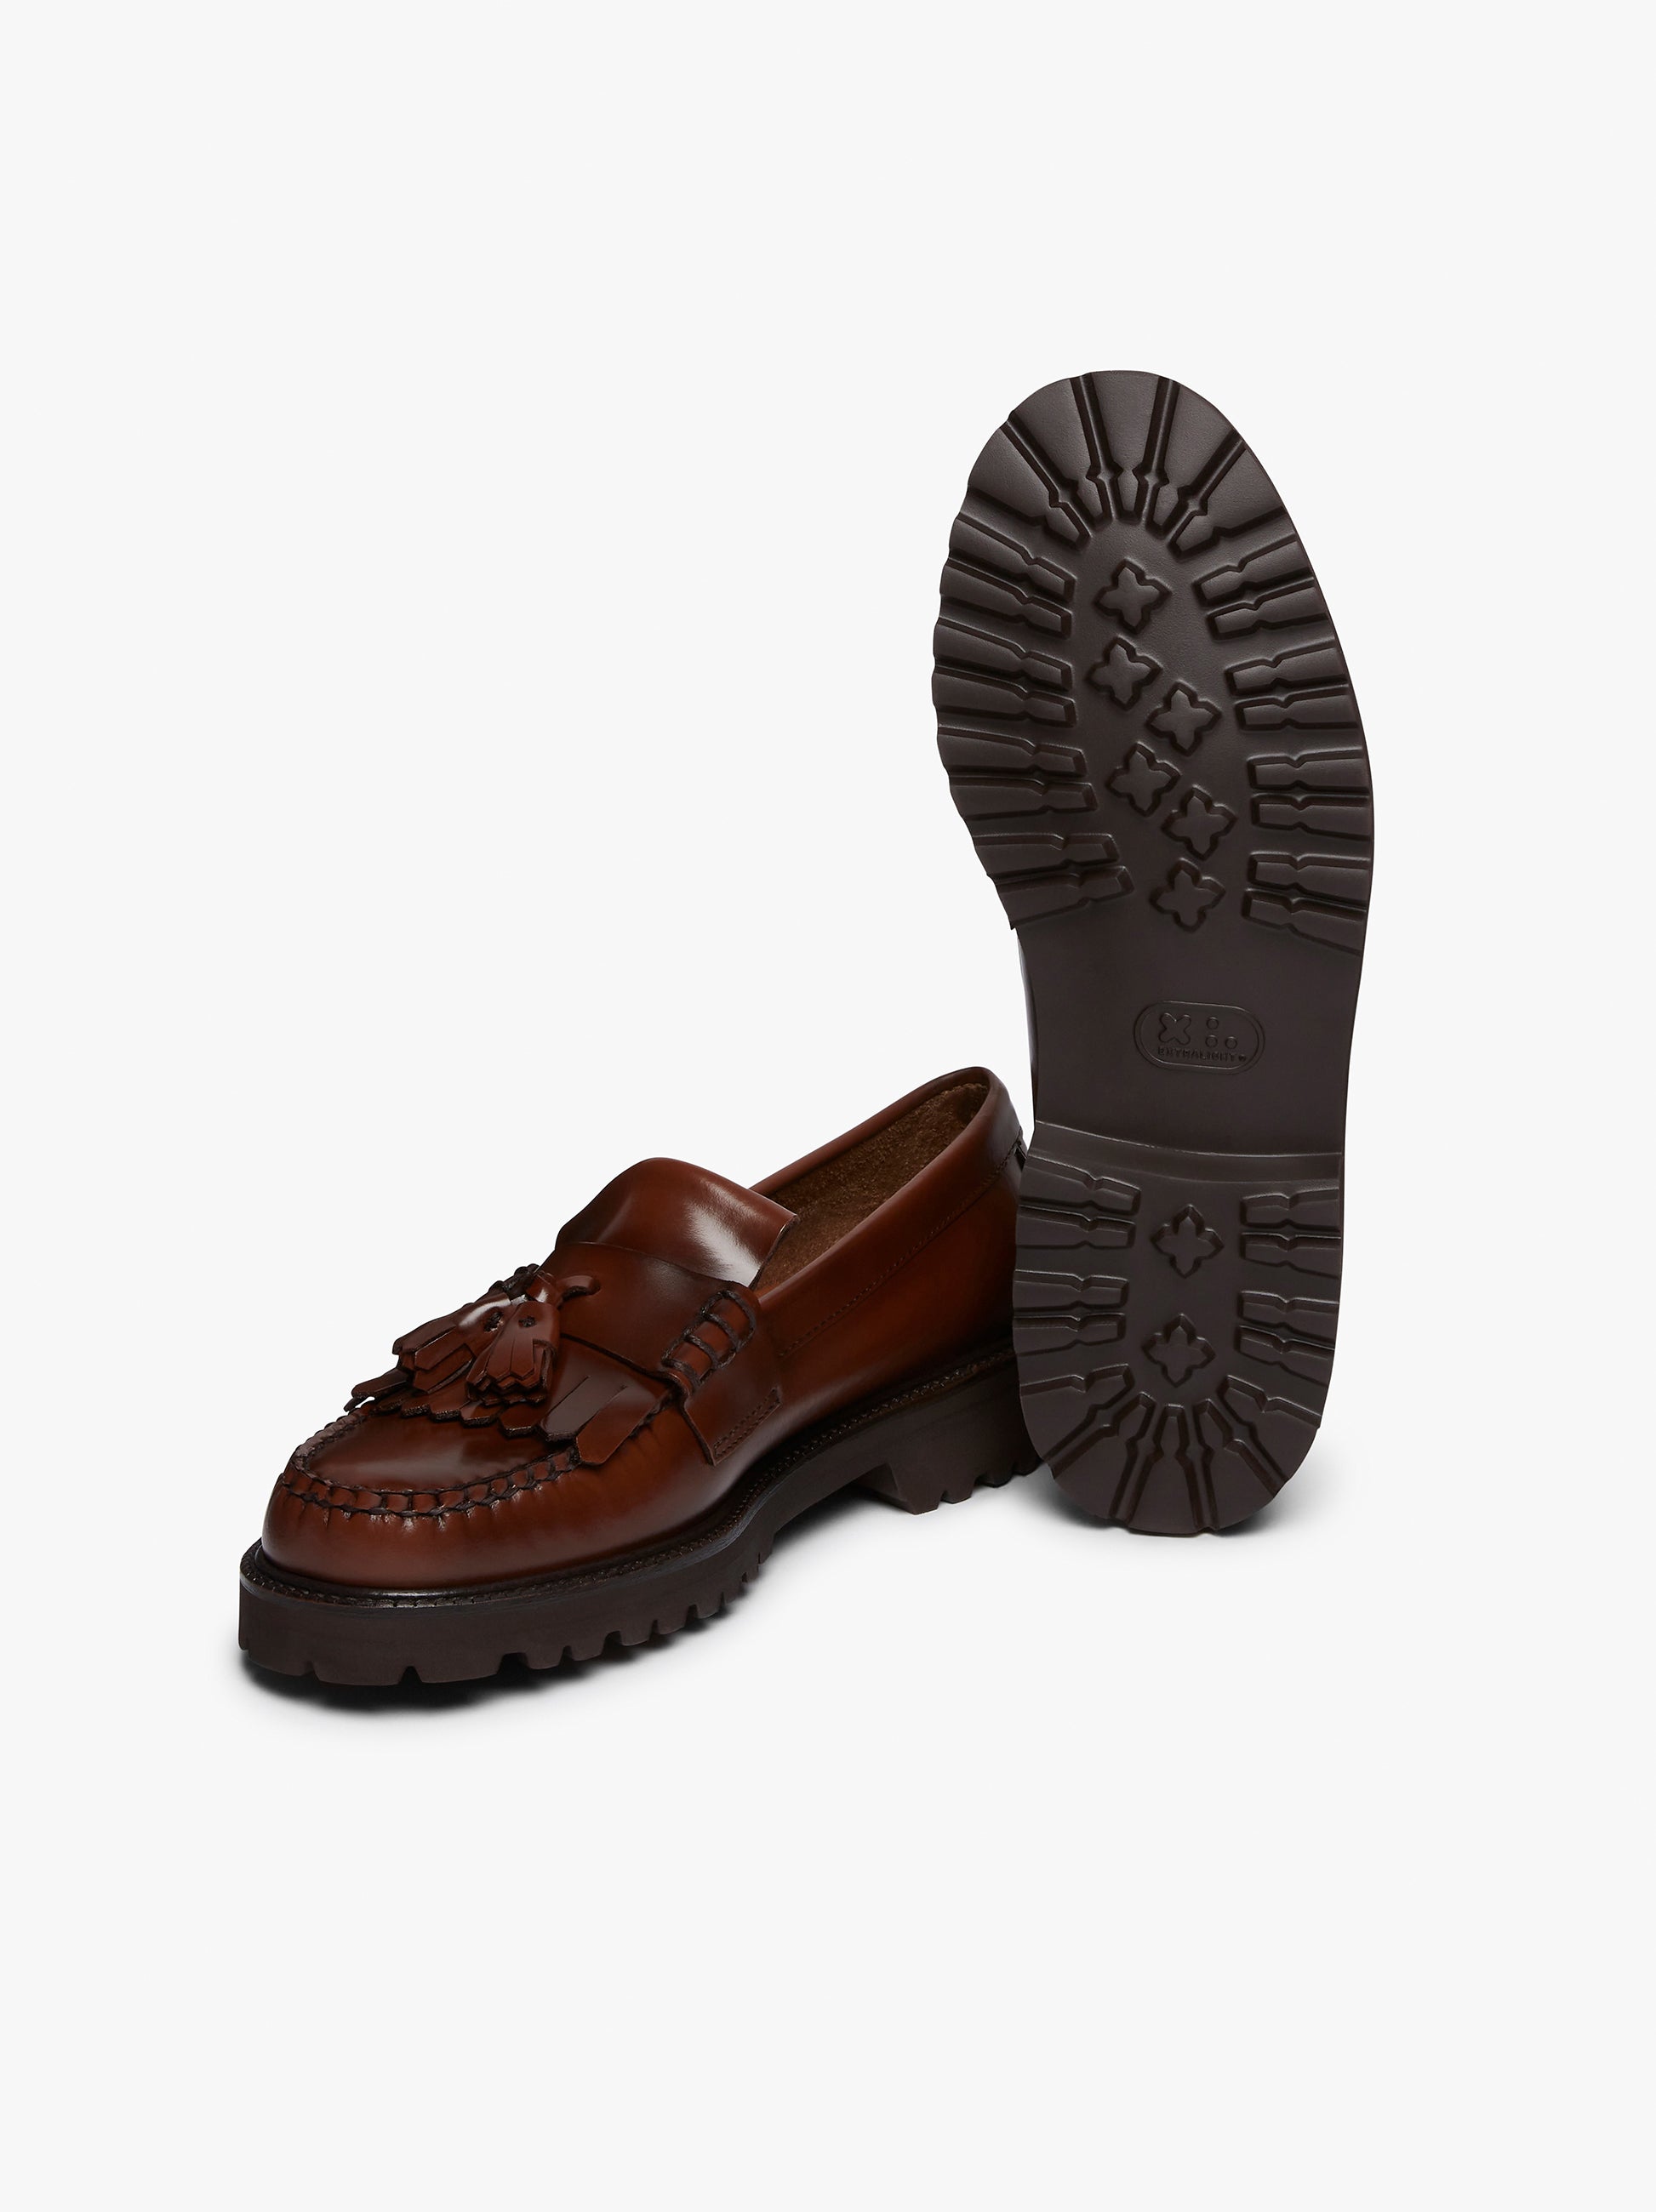 Mens Kiltie Tassel Loafers | Brown Leather Loafers – G.H.BASS